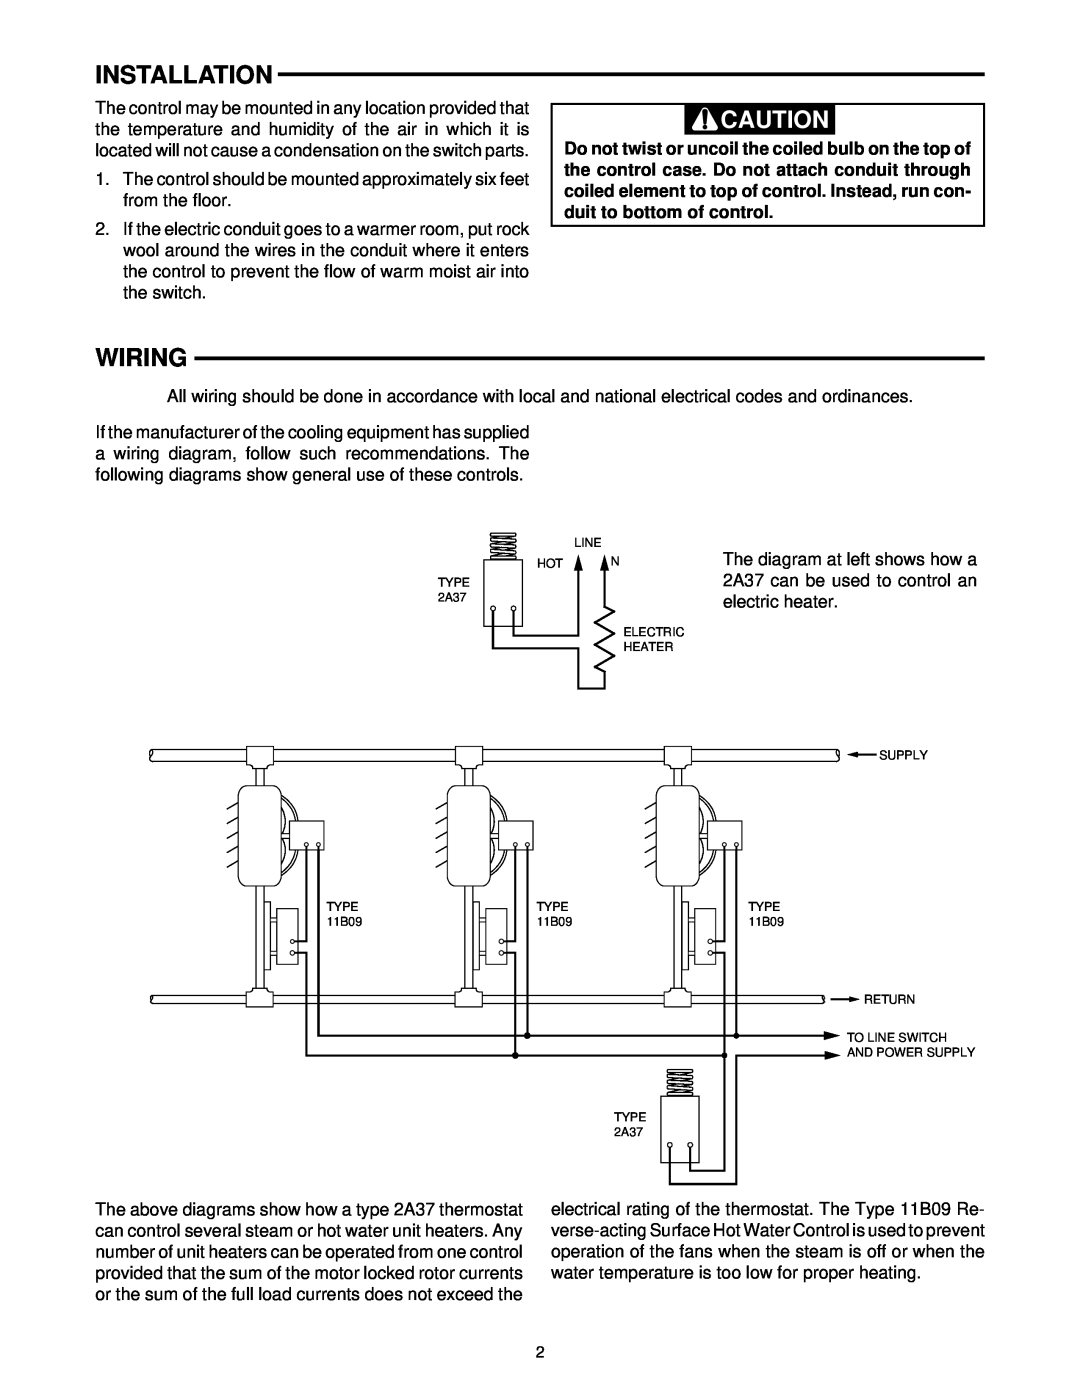 White Rodgers 2A37 installation instructions Installation, Wiring 